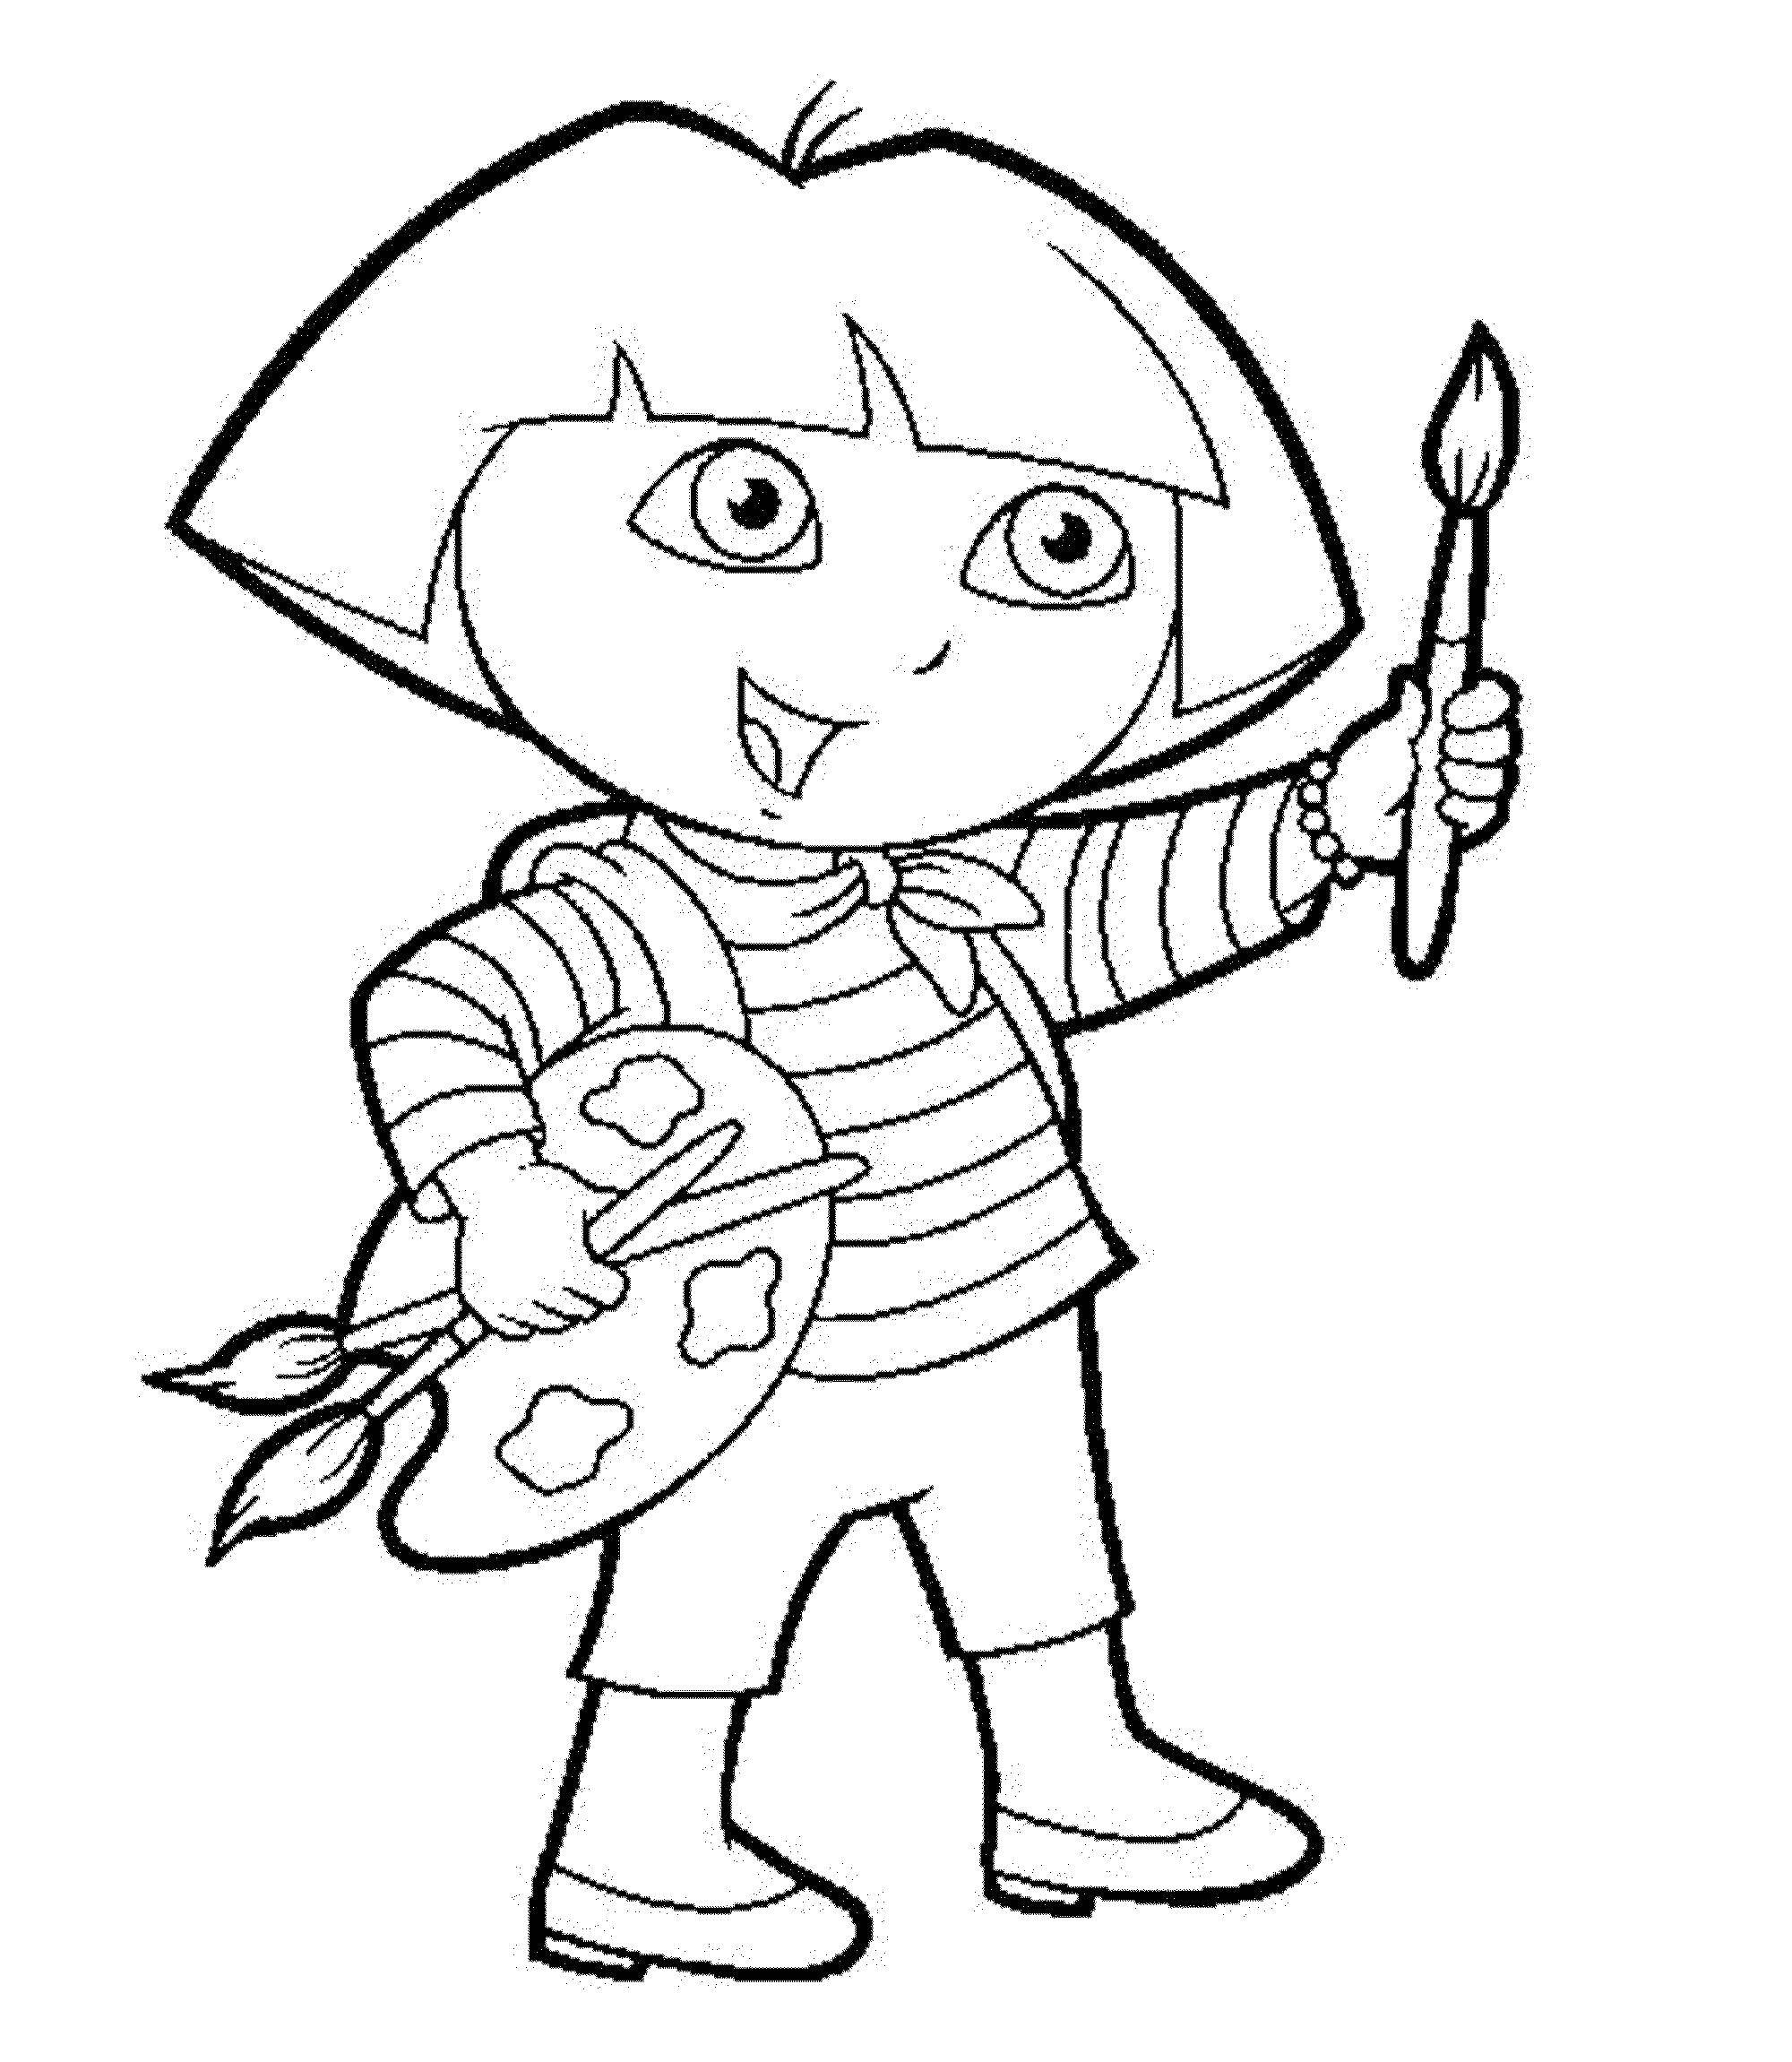 Coloring Dasha traveler with paints. Category Dora. Tags:  Dasha, slipper.